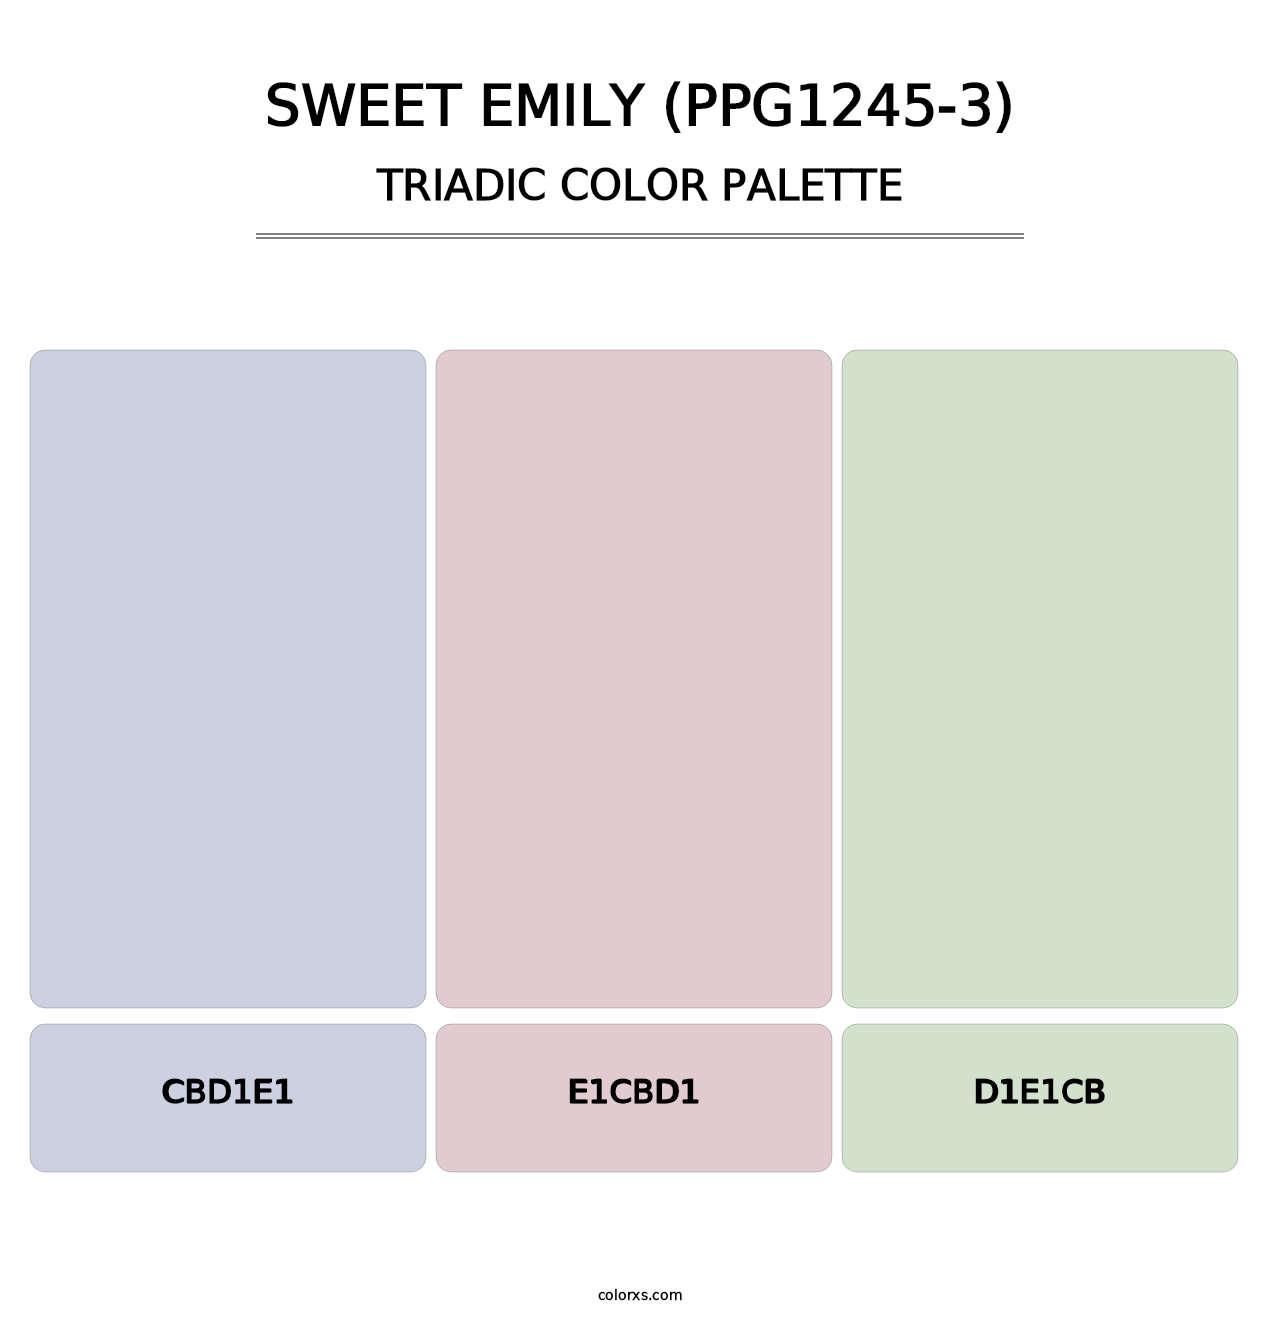 Sweet Emily (PPG1245-3) - Triadic Color Palette